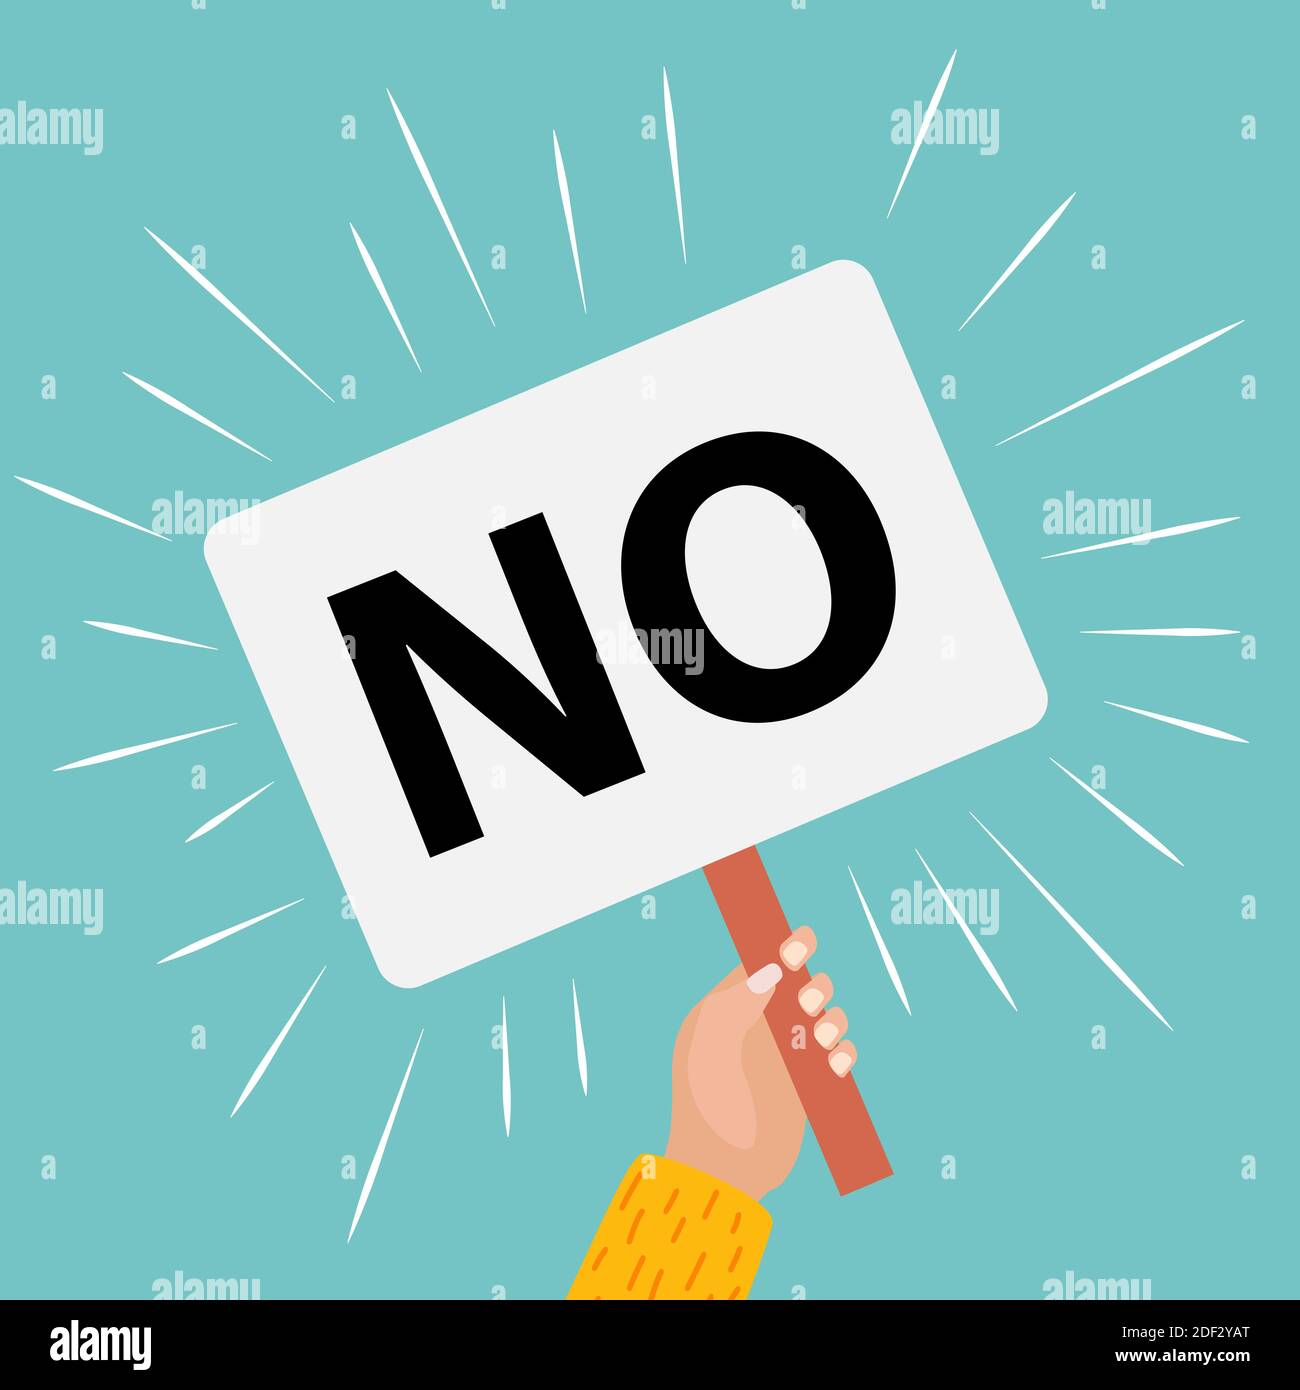 Hands holding placard with NO word background.  Illustration Stock Photo